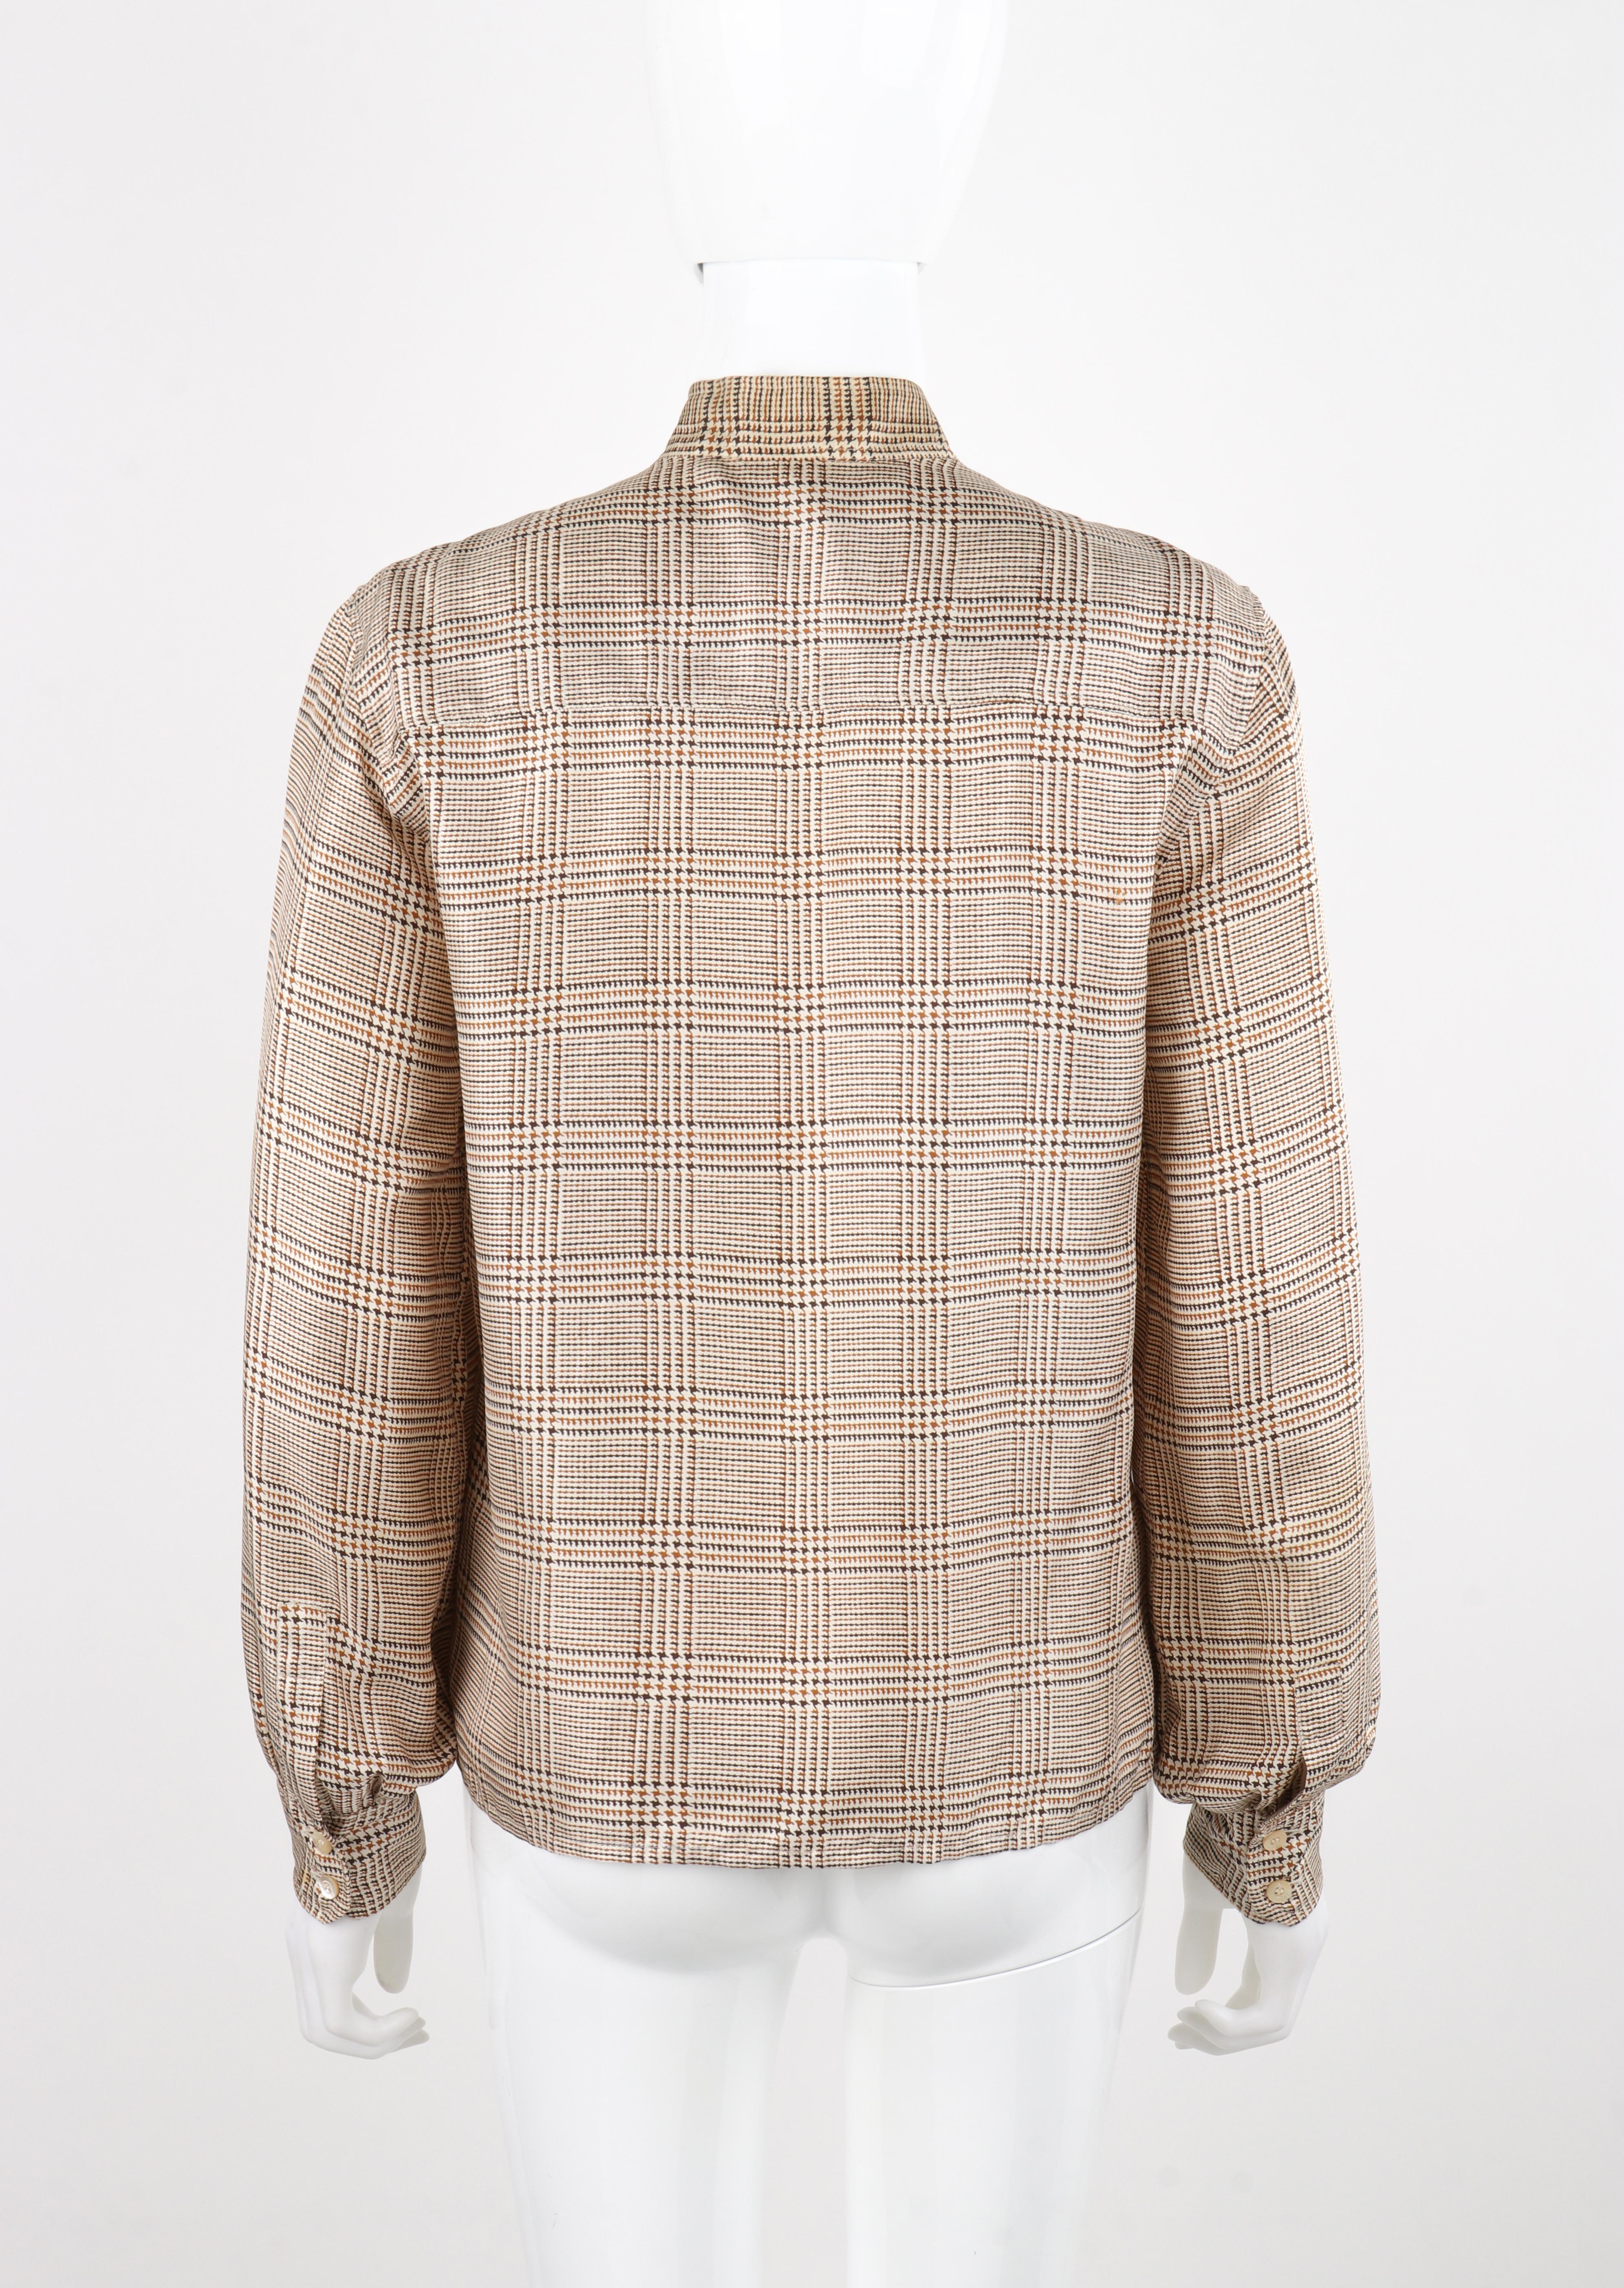 CELINE c.1970's Brown Tan Silk Houndstooth Print Pussybow Button Up Blouse Top For Sale 2